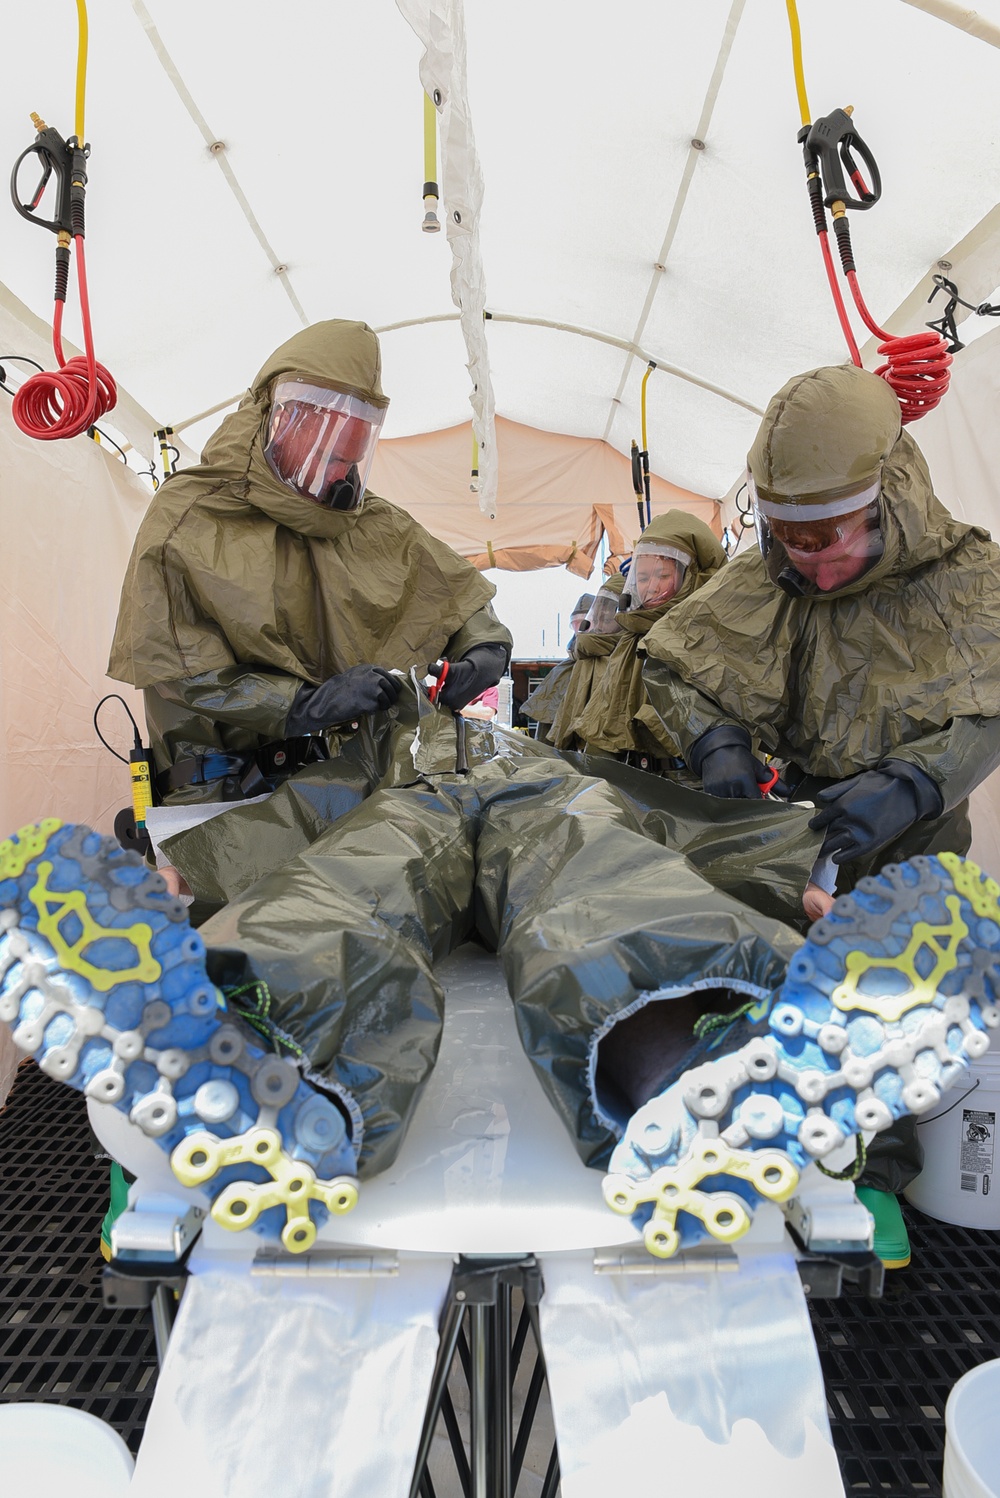 153rd Medical Group trains for incident response